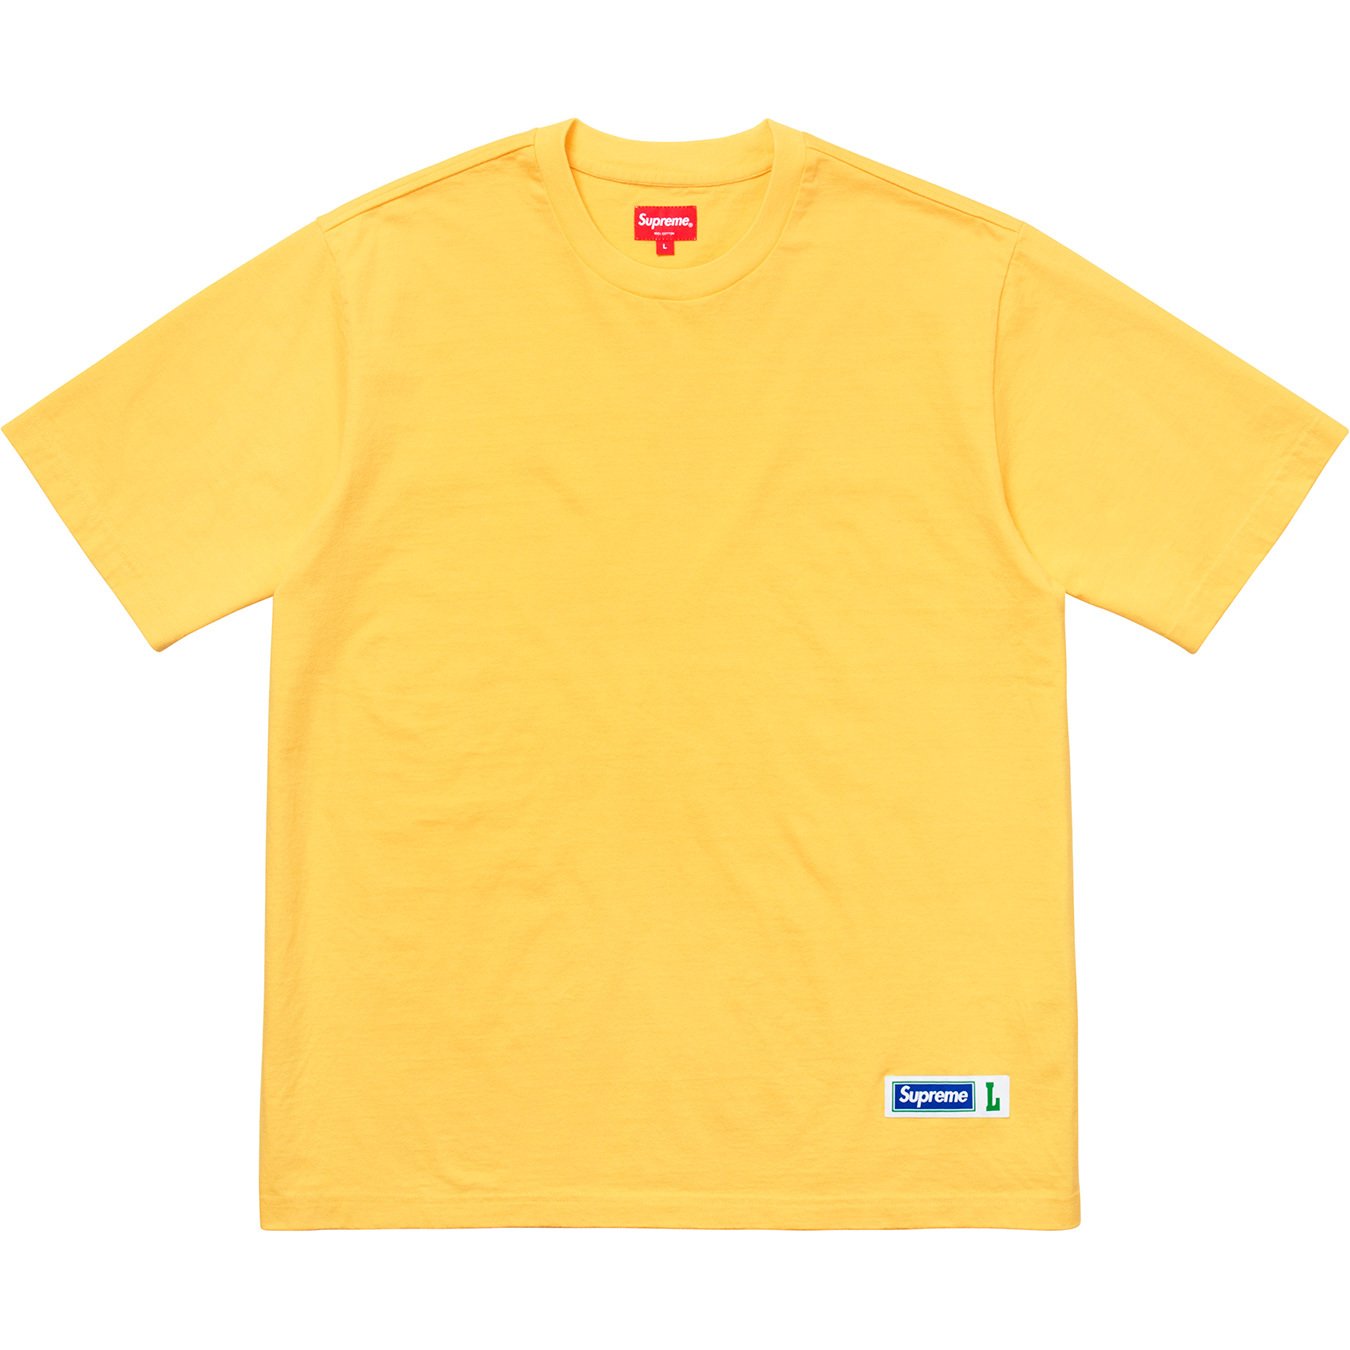 Supreme Athletic Label S/S Top Yellow メンズ - SS18 - JP